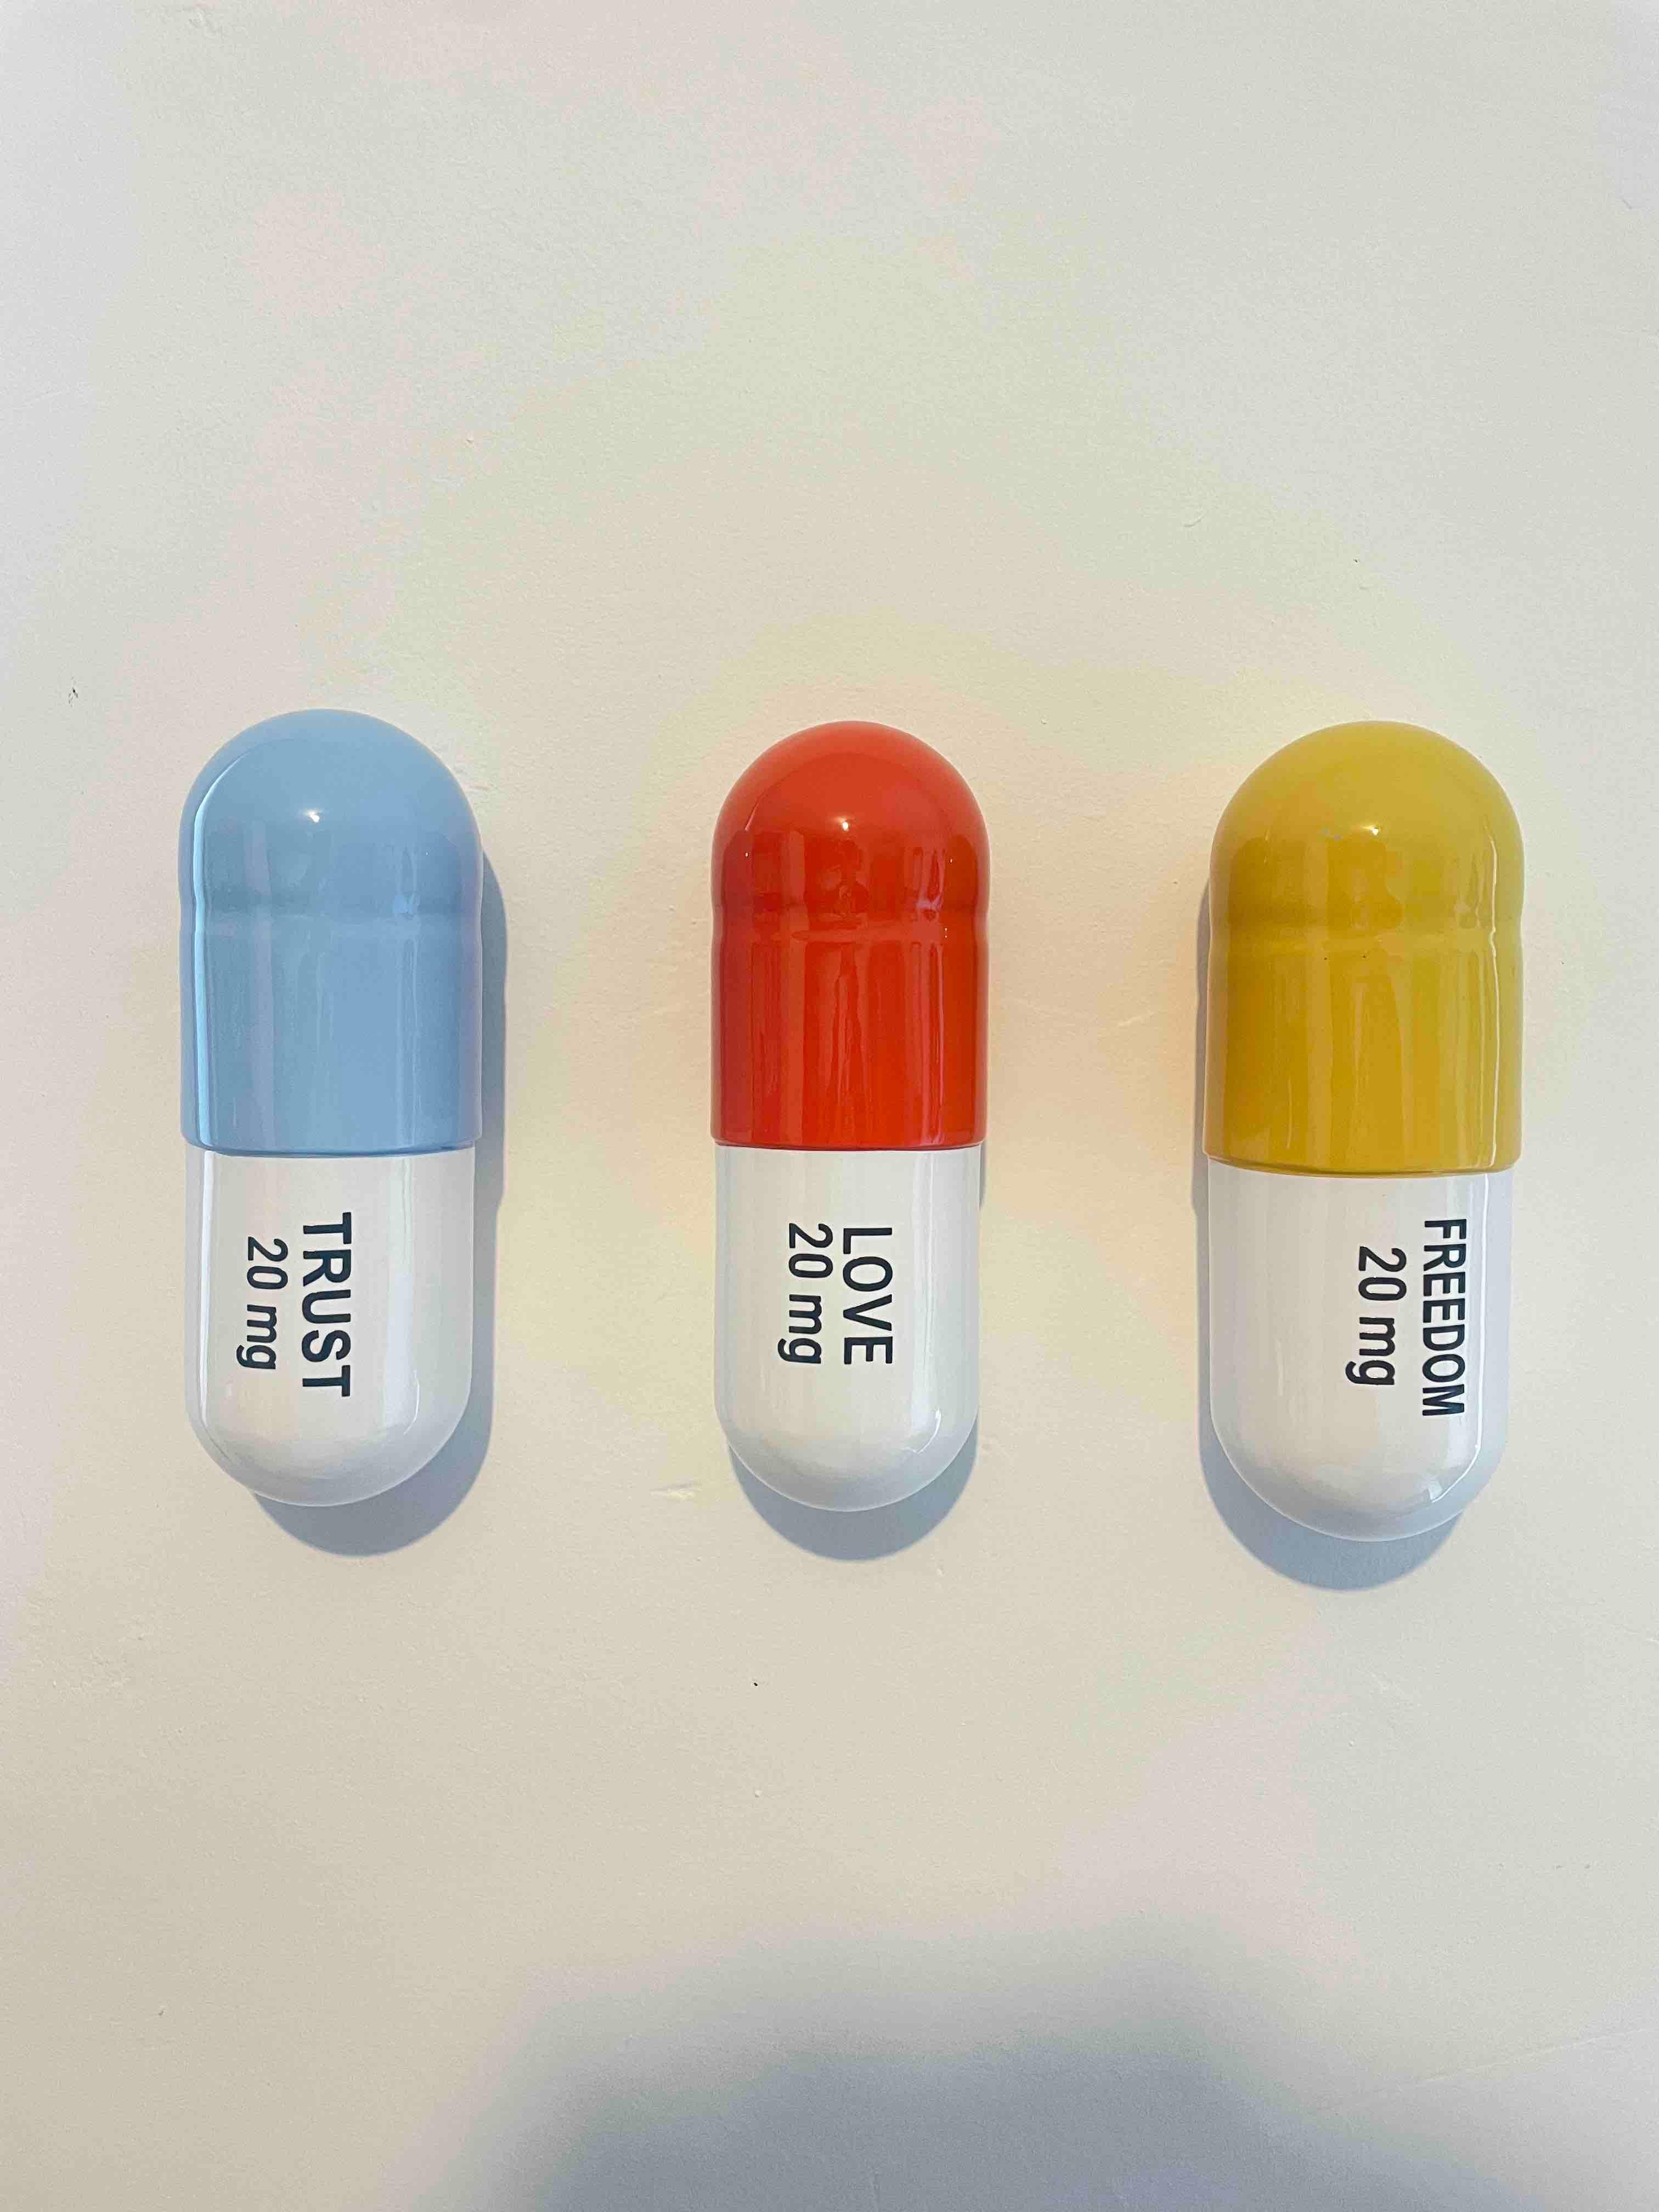 Tal Nehoray Figurative Sculpture - 20 MG Trust, Love, Freedom pill Combo (turquoise, orange, yellow)